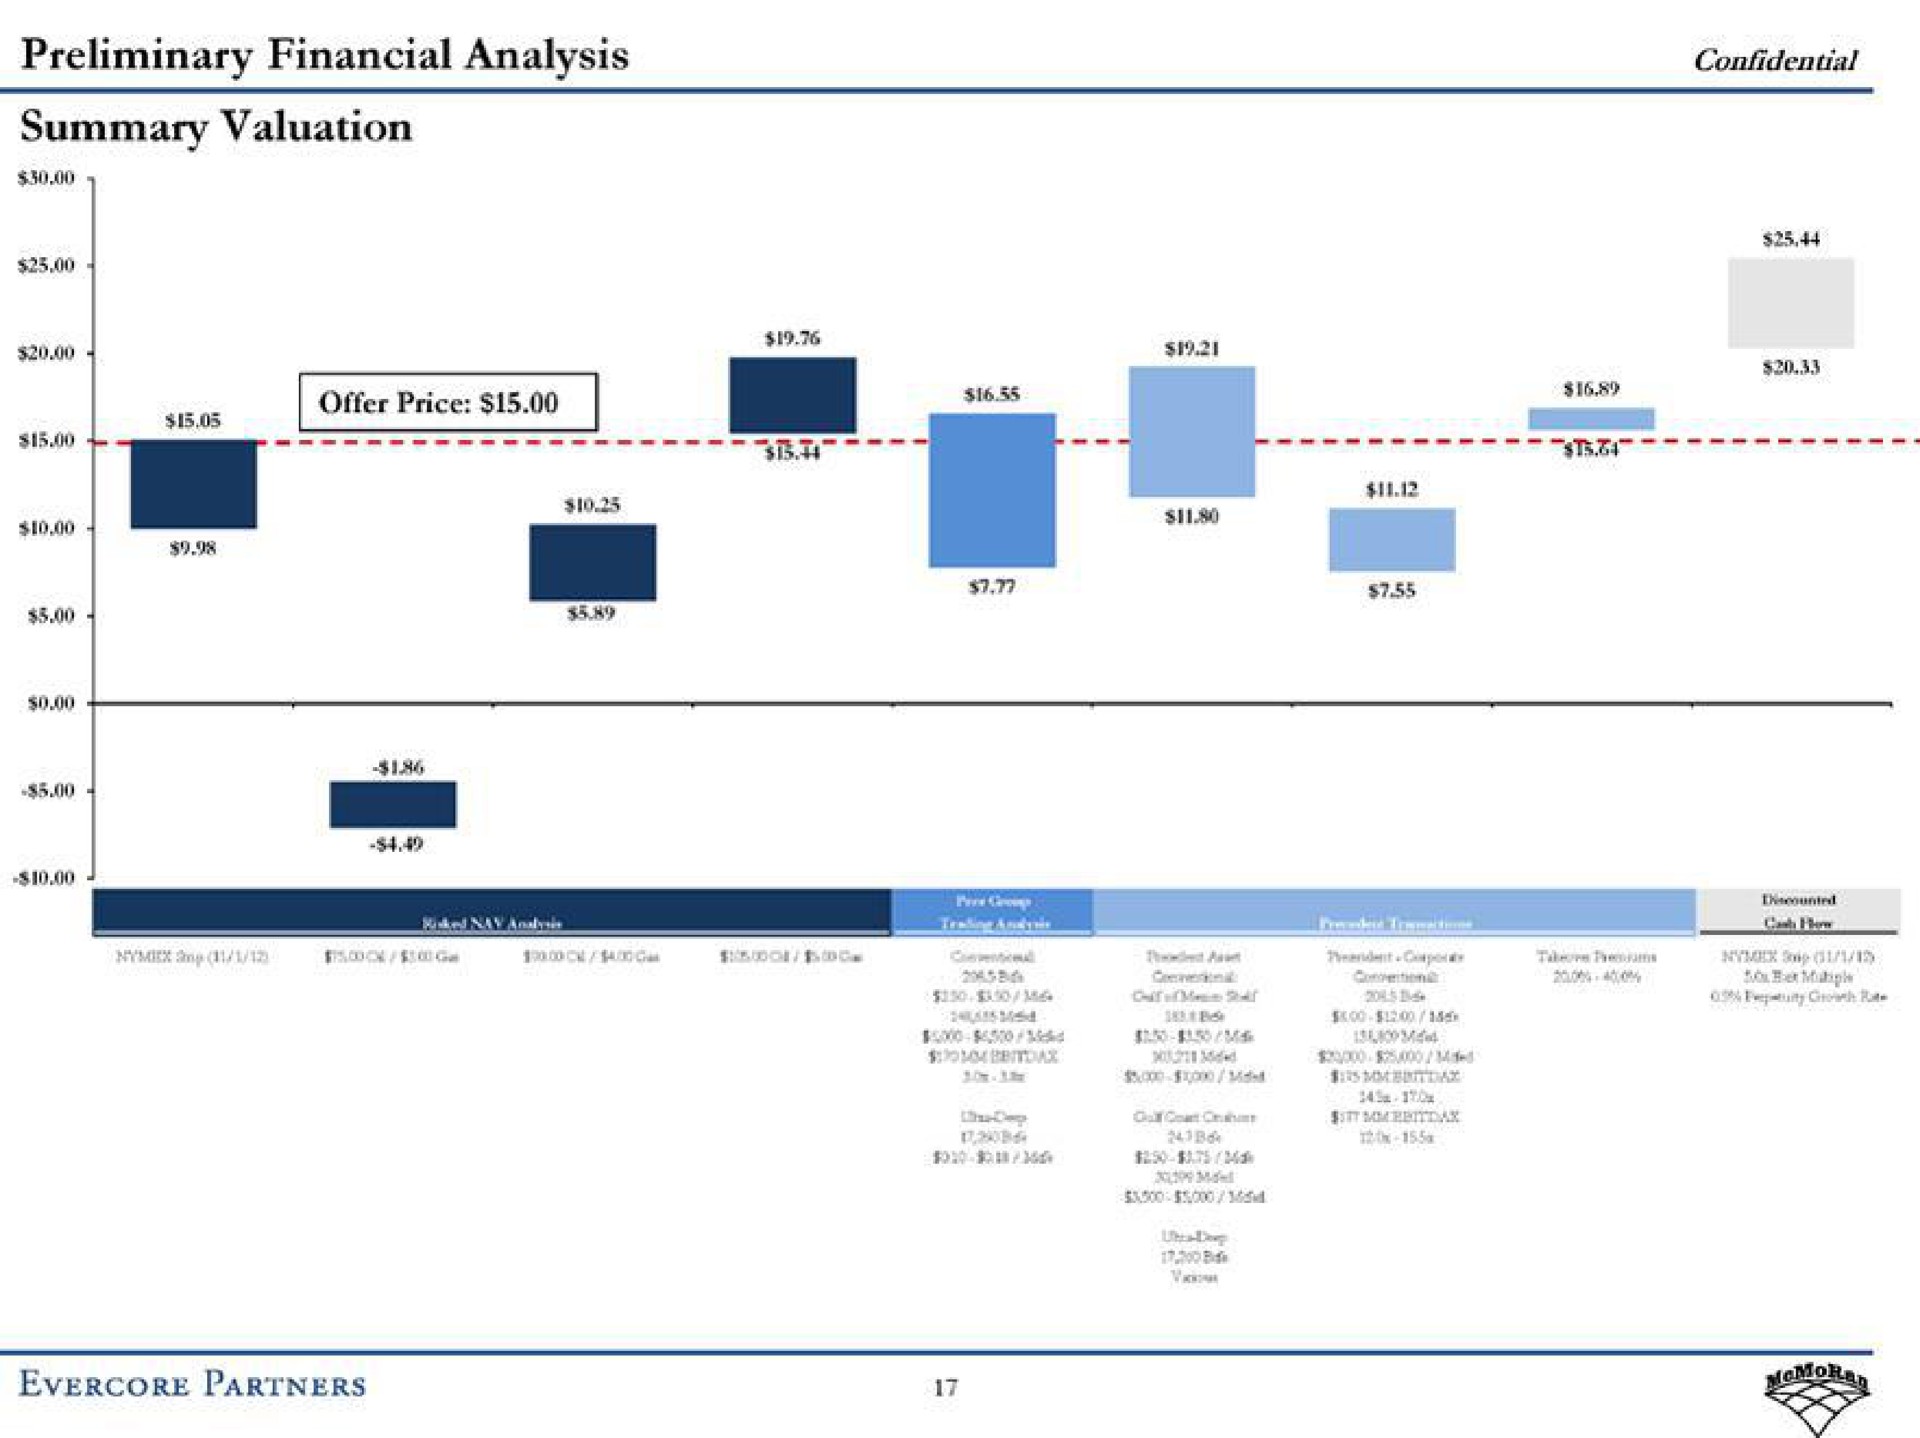 preliminary financial analysis summary valuation confidential partners | Evercore